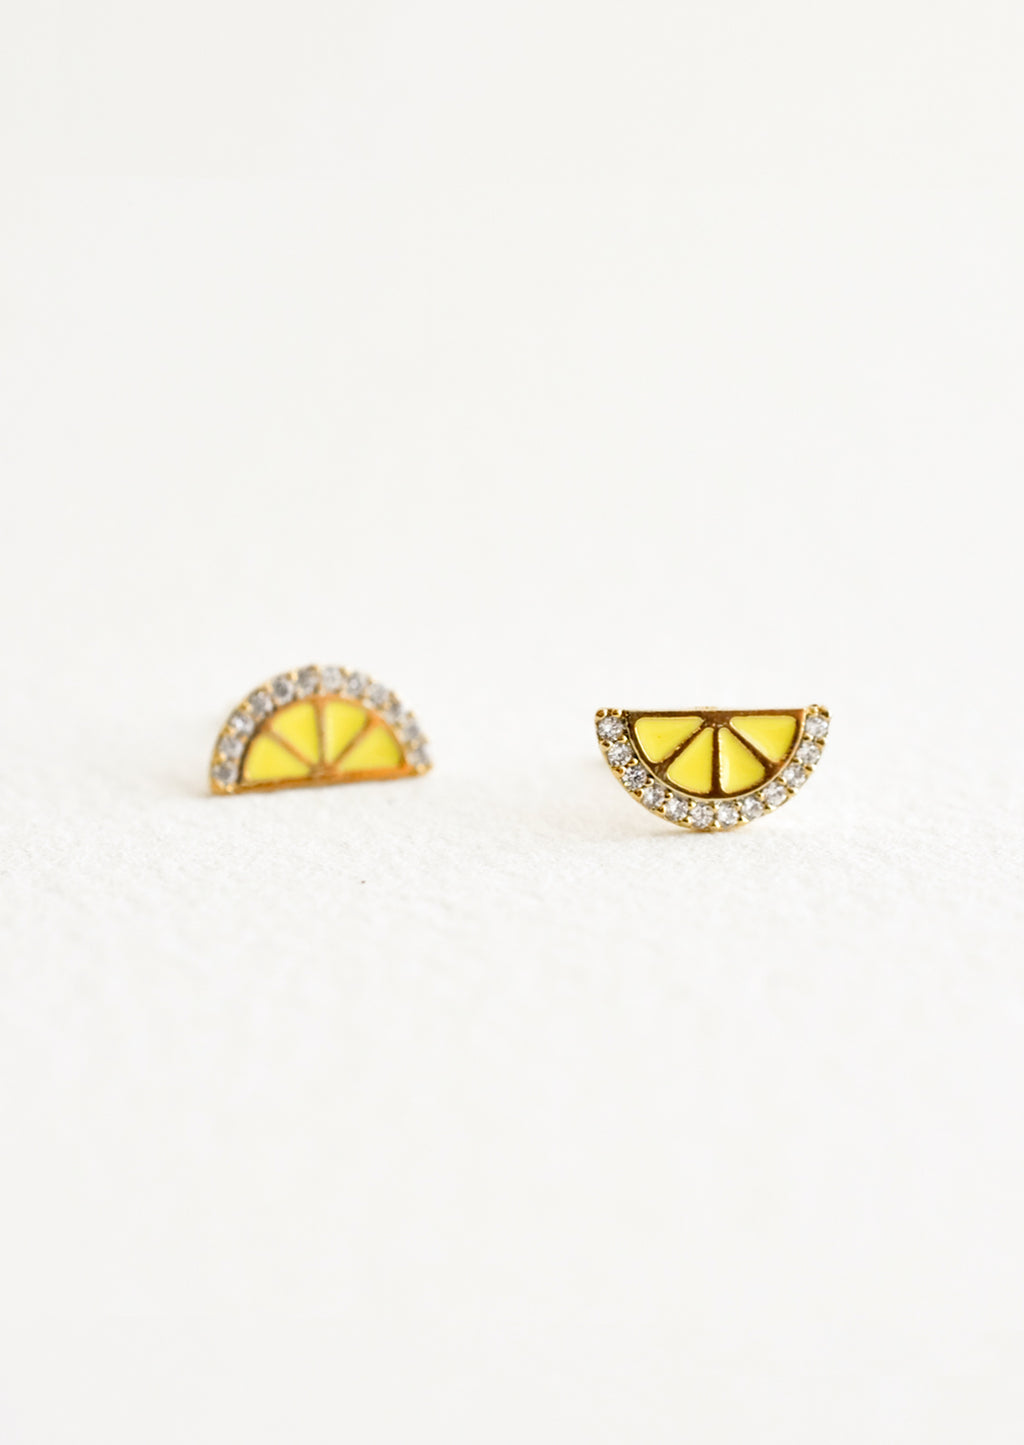 1: Stud earrings in the shape of a lemon wedge with crystal "rind".